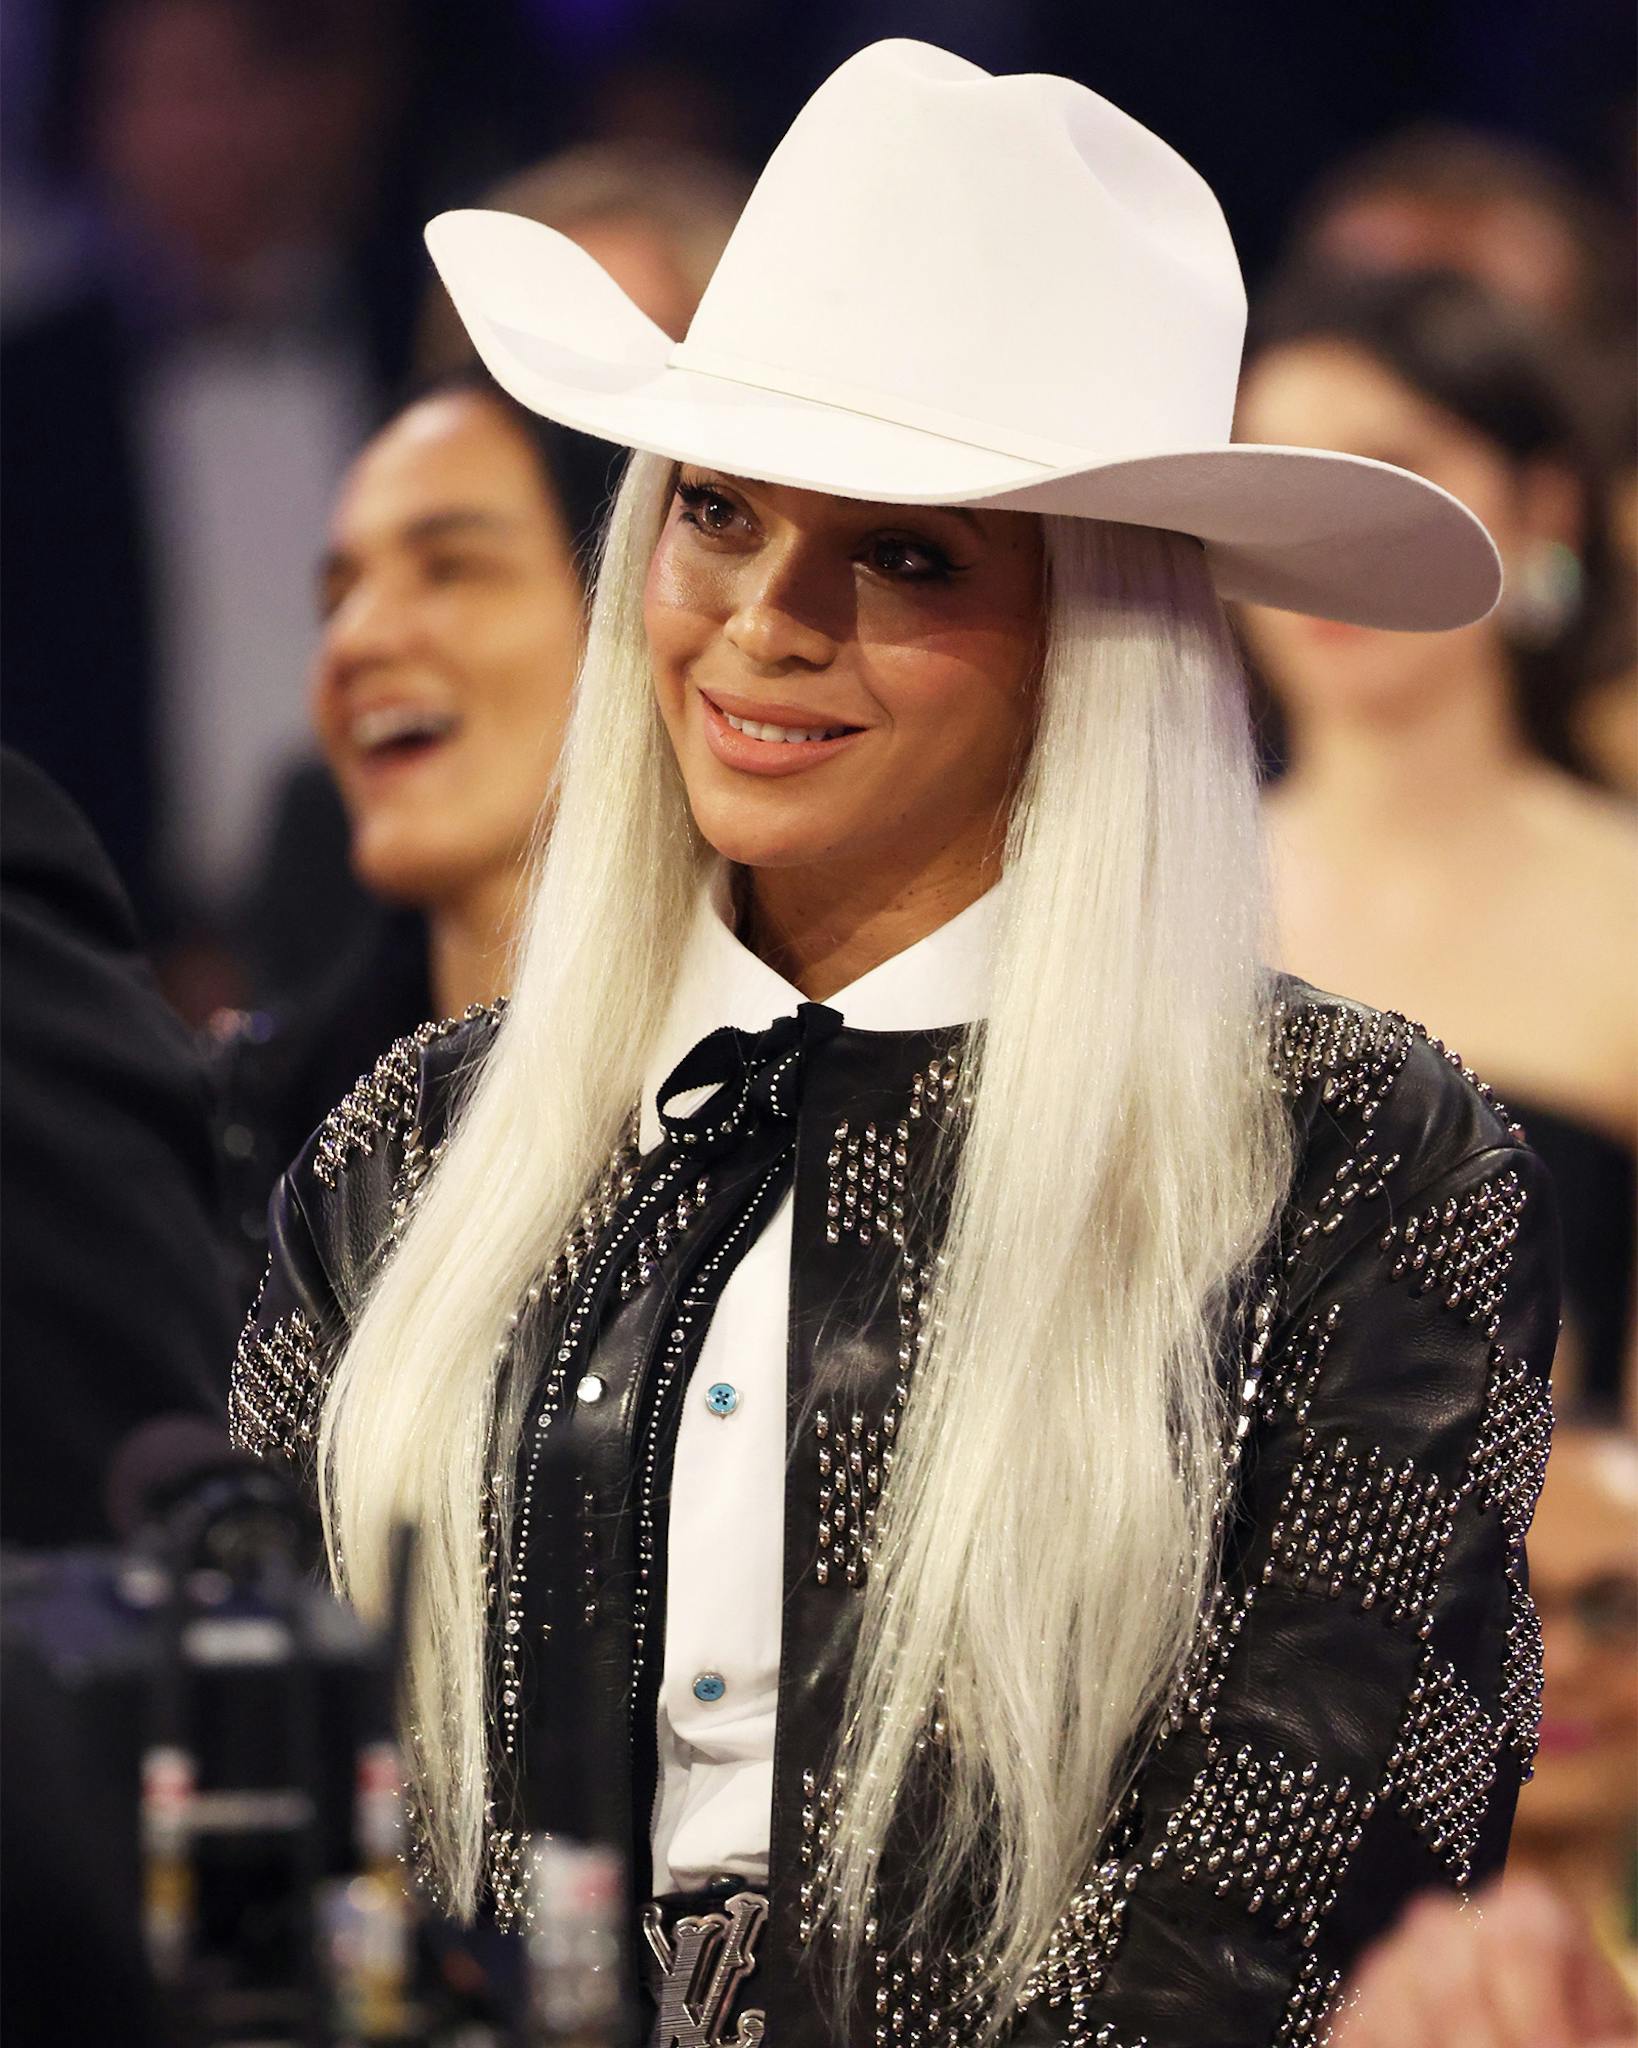 Beyoncé fully committed to her Western getup but with her own spin. The two-piece Louis Vuitton black leather and stud checkered blazer set is equally chic and glamorous, paired with a bow-meets-bolo tie (the accessory of the year) and a comically big white Cowboy hat that was her instant giveaway in the crowded room of stars. 